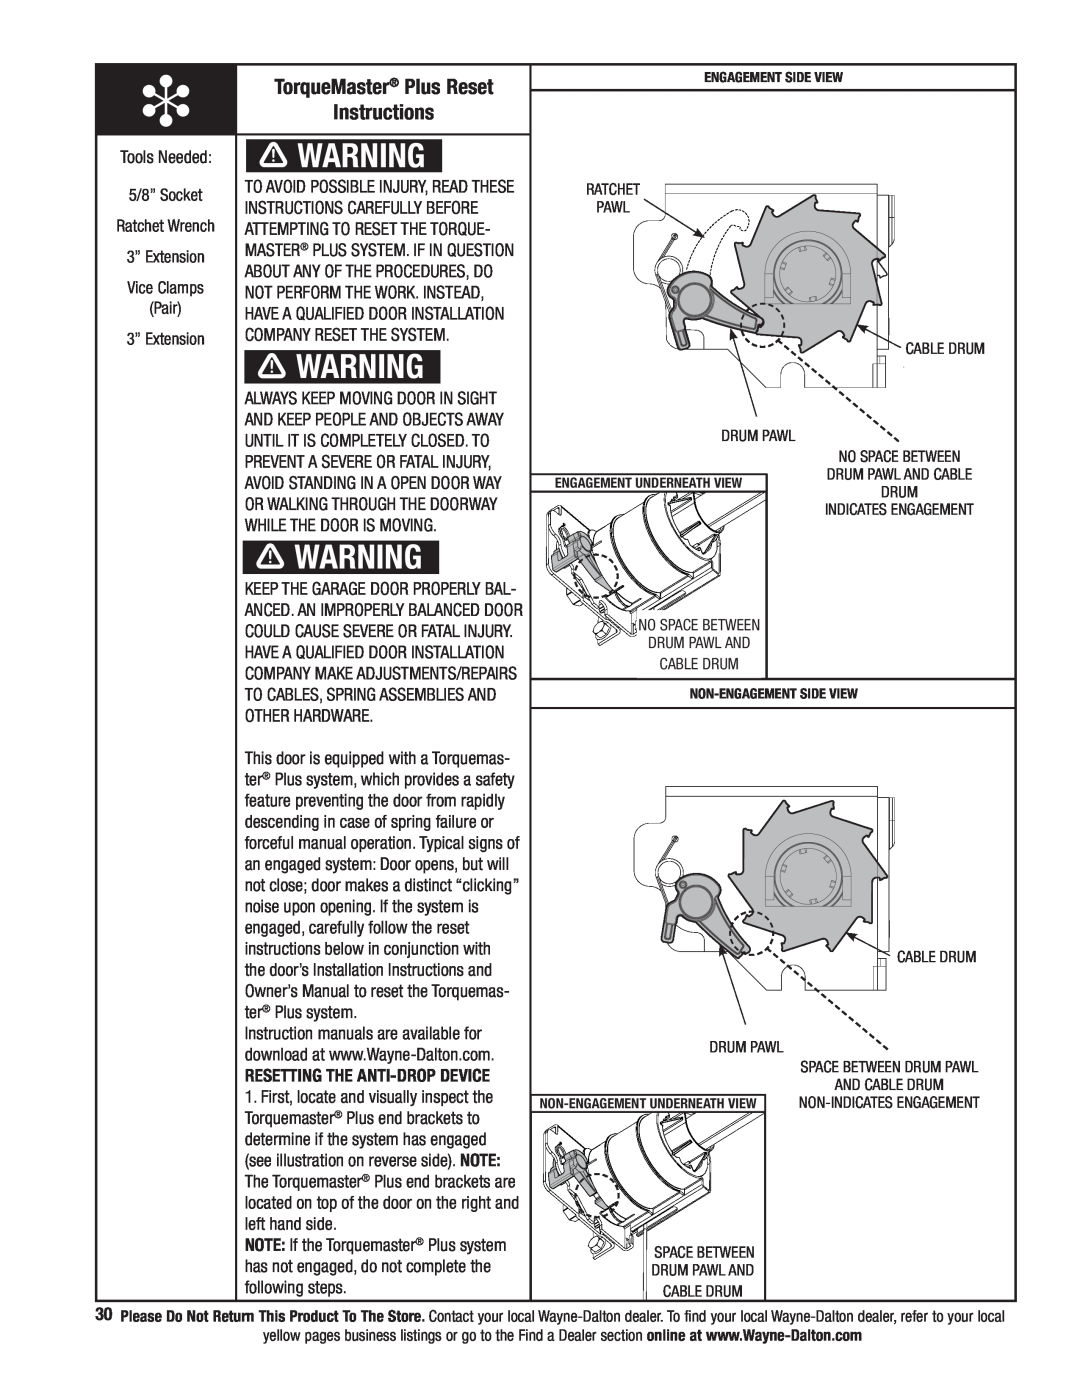 Wayne-Dalton 341458 TorqueMaster Plus Reset Instructions, Company Reset The System, While The Door Is Moving 